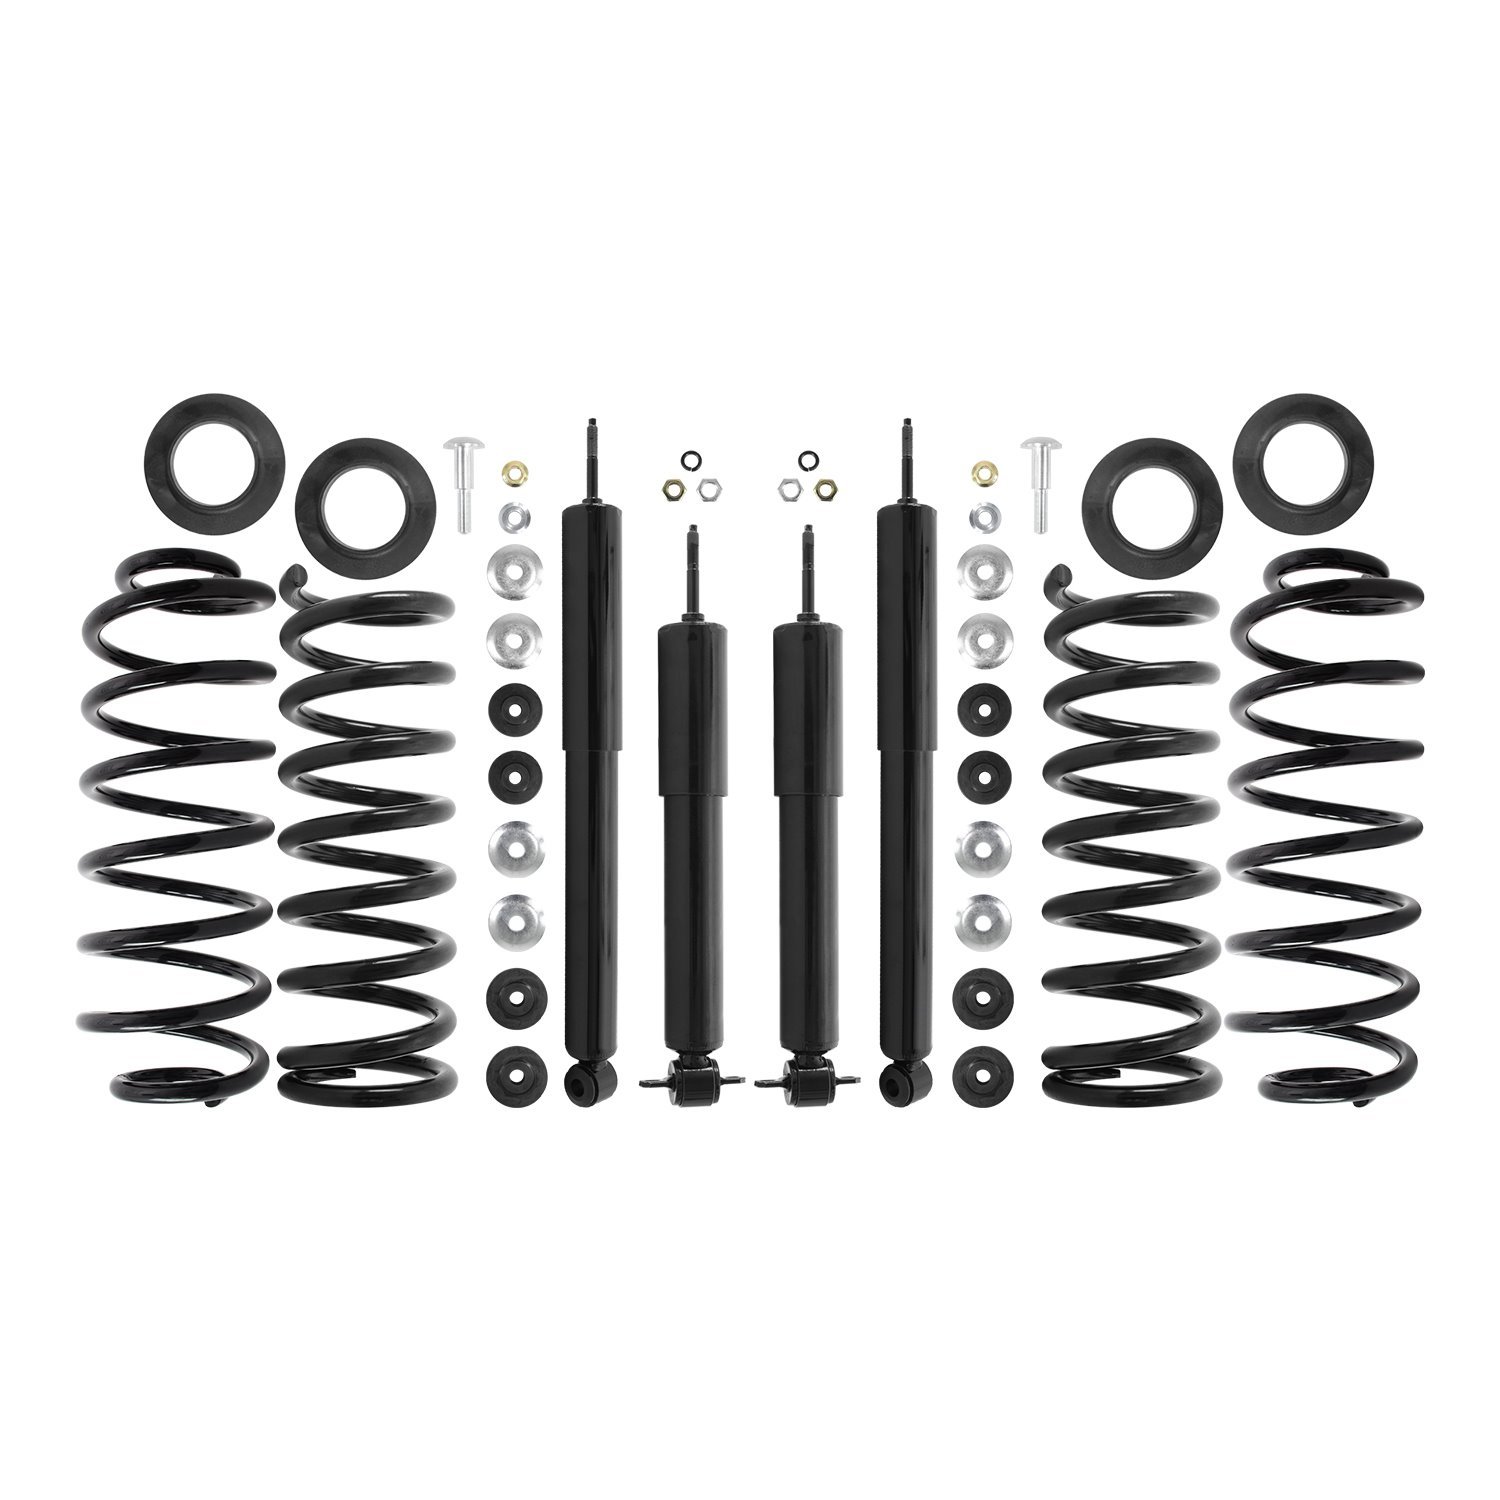 4-60969c-65003c-001 Air Spring To Coil Spring Conversion Kit Fits Select Ford Crown Victoria, Mercury Grand Marquis